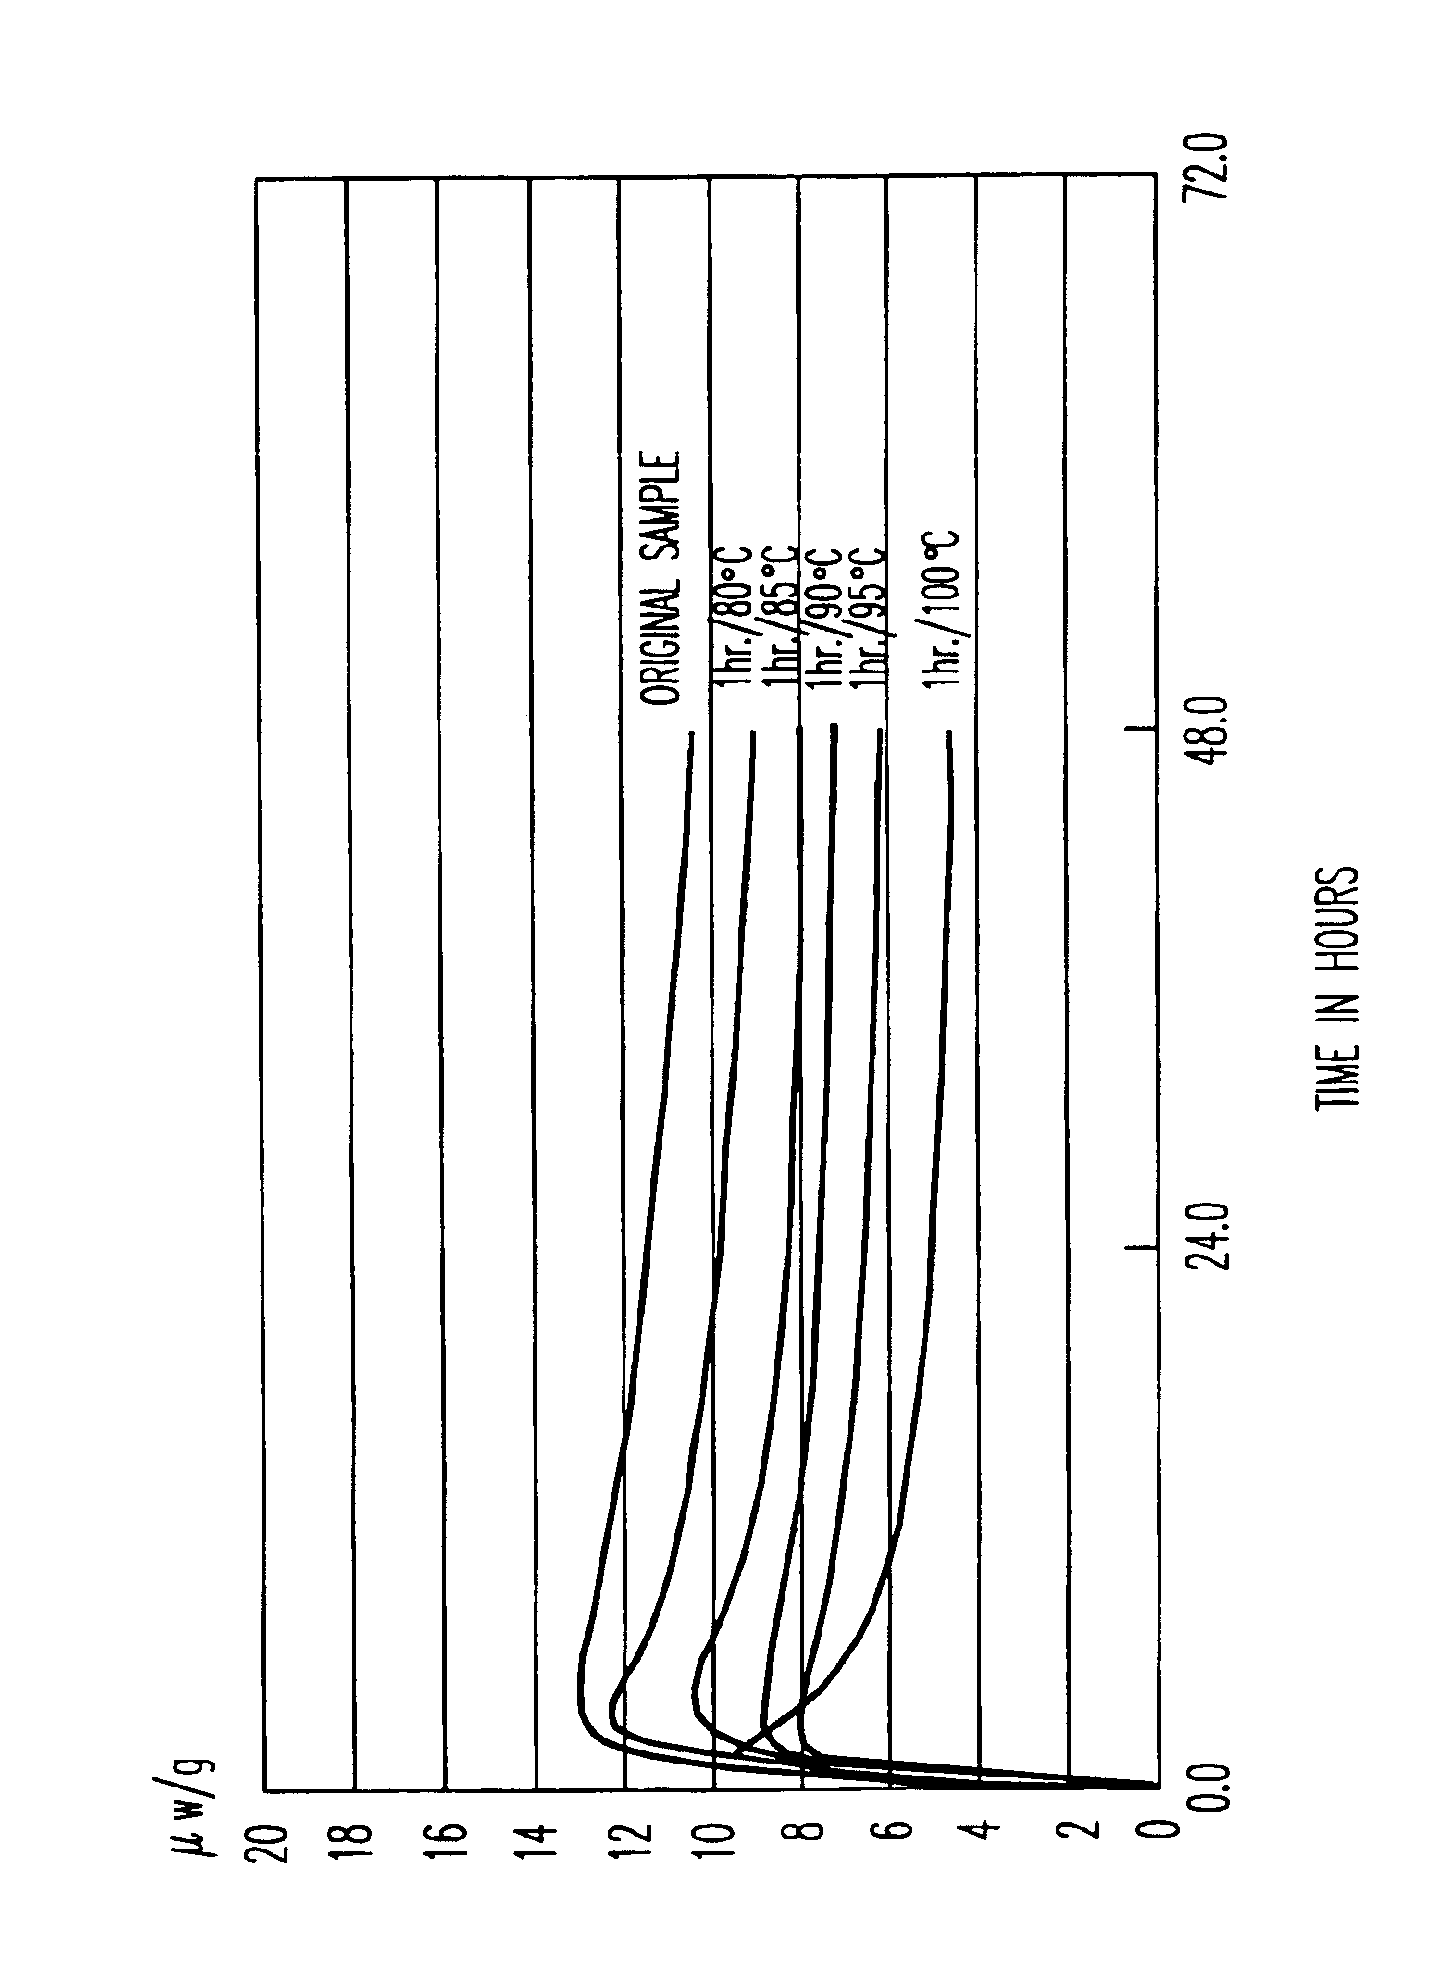 Process for improving the internal stability of sodium percarbonate